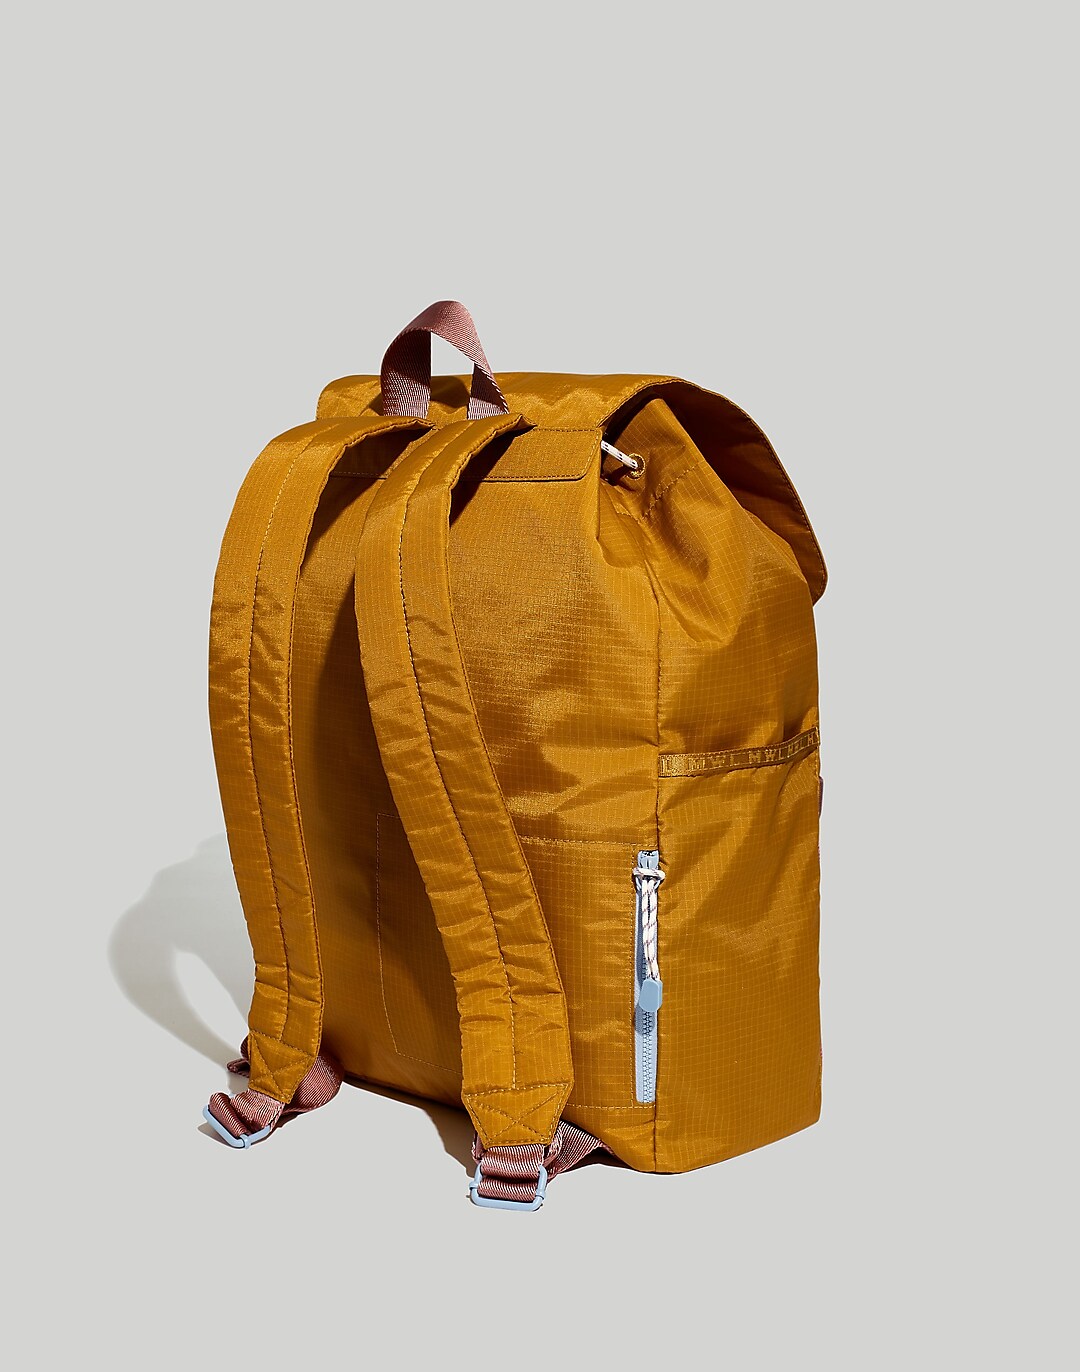 The MWL (Re)sourced Ripstop Nylon Backpack